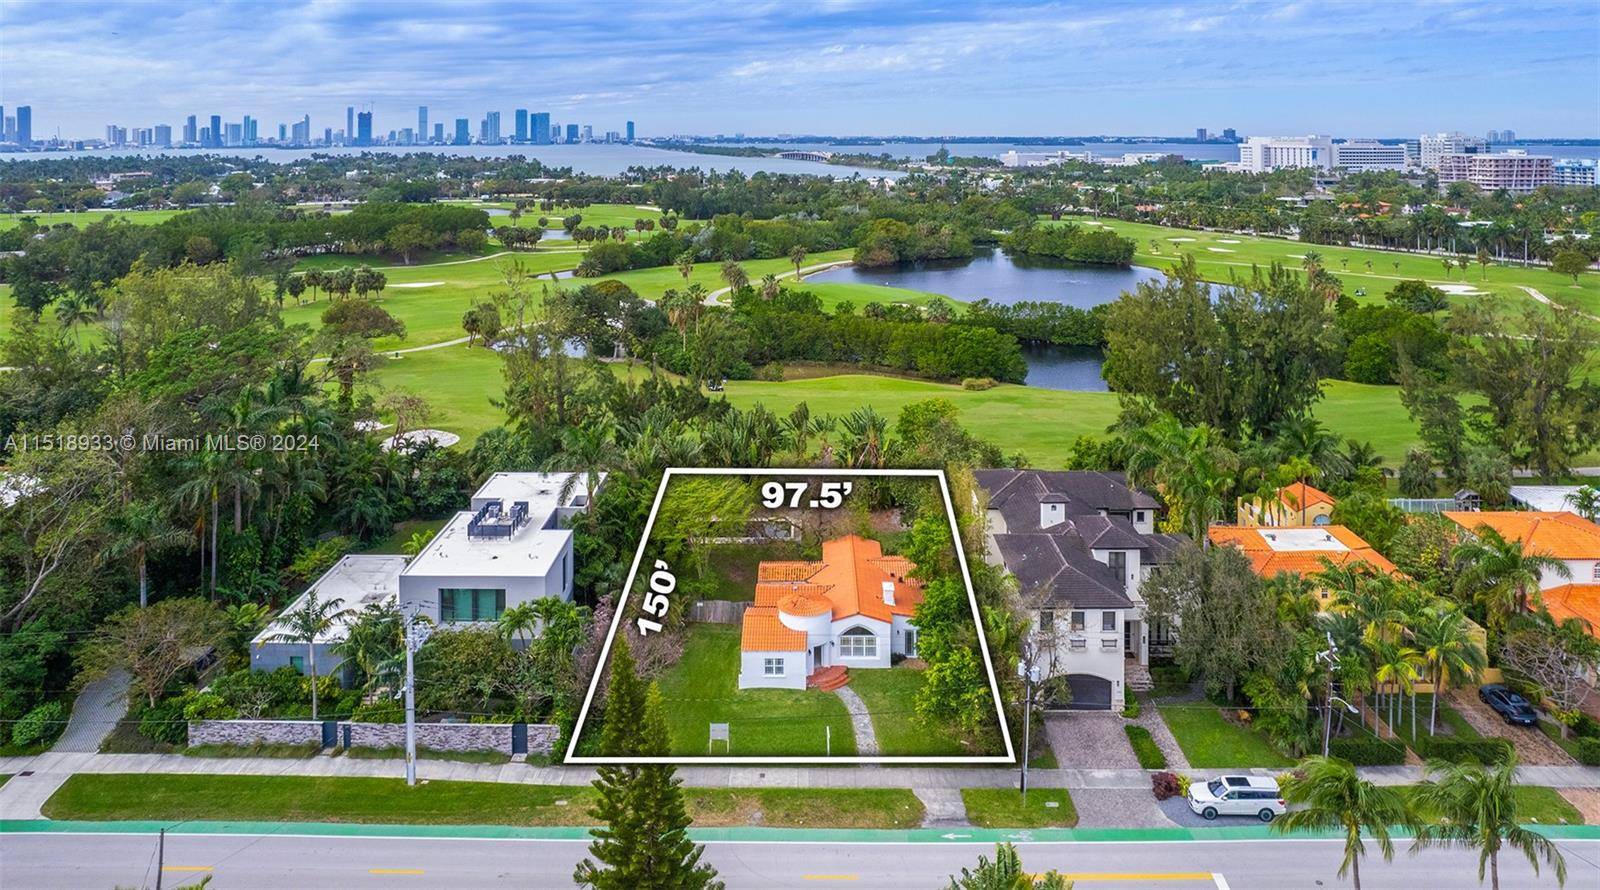 Imagine your dream home on this oversized 14, 625 SF lot situated directly on the Miami Beach Golf Course, where you can enjoy western exposure and sunset views over the ...